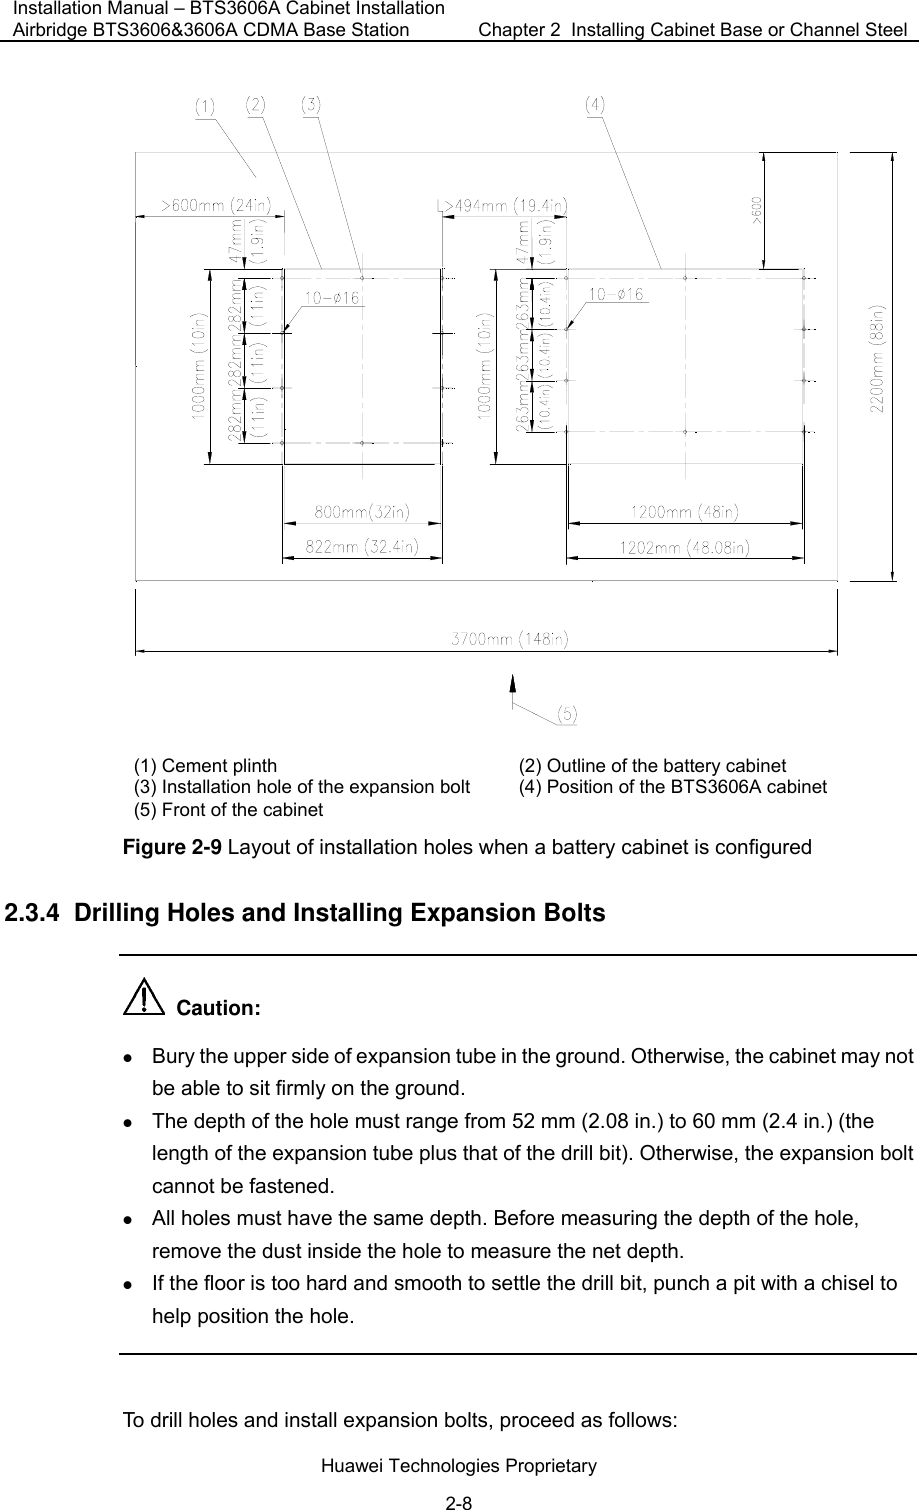 Installation Manual – BTS3606A Cabinet Installation Airbridge BTS3606&amp;3606A CDMA Base Station  Chapter 2  Installing Cabinet Base or Channel Steel  Huawei Technologies Proprietary 2-8  (1) Cement plinth (2) Outline of the battery cabinet (3) Installation hole of the expansion bolt   (4) Position of the BTS3606A cabinet (5) Front of the cabinet  Figure 2-9 Layout of installation holes when a battery cabinet is configured 2.3.4  Drilling Holes and Installing Expansion Bolts   Caution: z Bury the upper side of expansion tube in the ground. Otherwise, the cabinet may not be able to sit firmly on the ground.  z The depth of the hole must range from 52 mm (2.08 in.) to 60 mm (2.4 in.) (the length of the expansion tube plus that of the drill bit). Otherwise, the expansion bolt cannot be fastened. z All holes must have the same depth. Before measuring the depth of the hole, remove the dust inside the hole to measure the net depth. z If the floor is too hard and smooth to settle the drill bit, punch a pit with a chisel to help position the hole.  To drill holes and install expansion bolts, proceed as follows:  